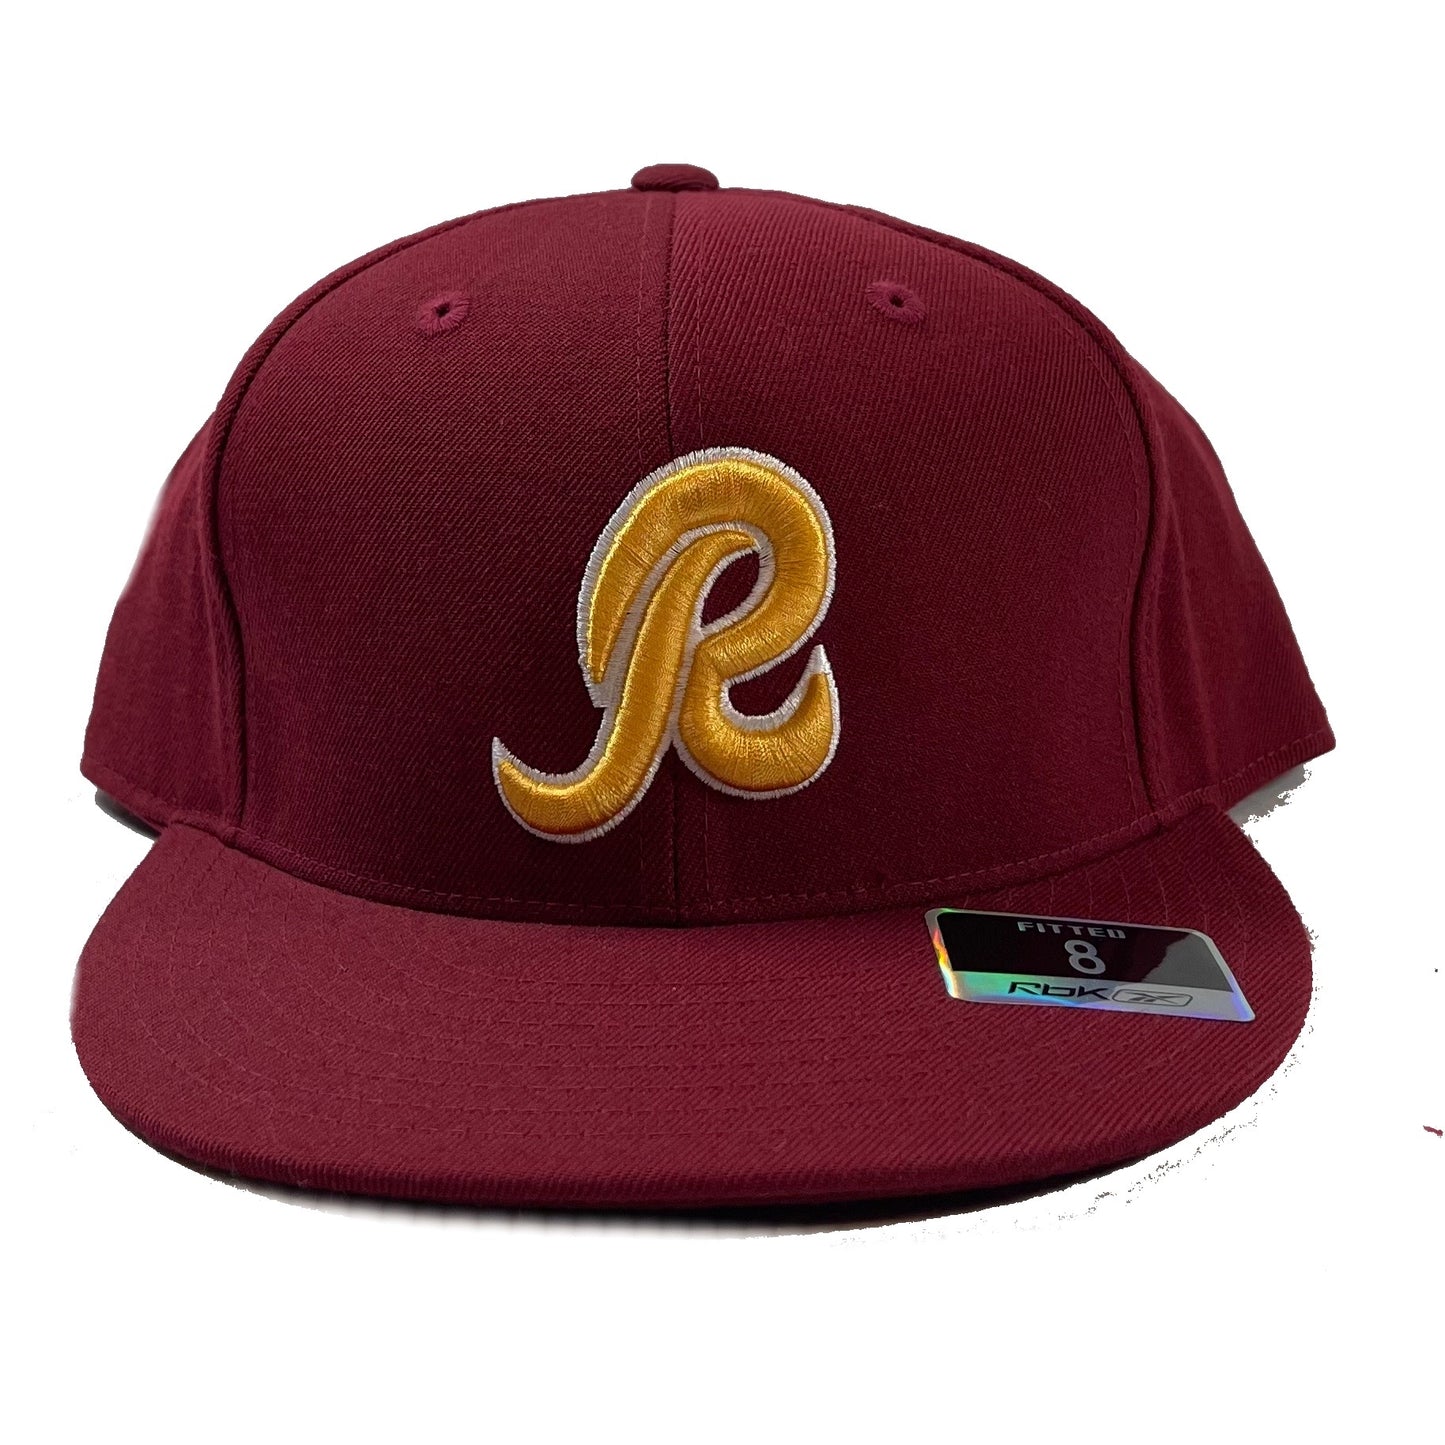 Washington Redskins (Red) Fitted